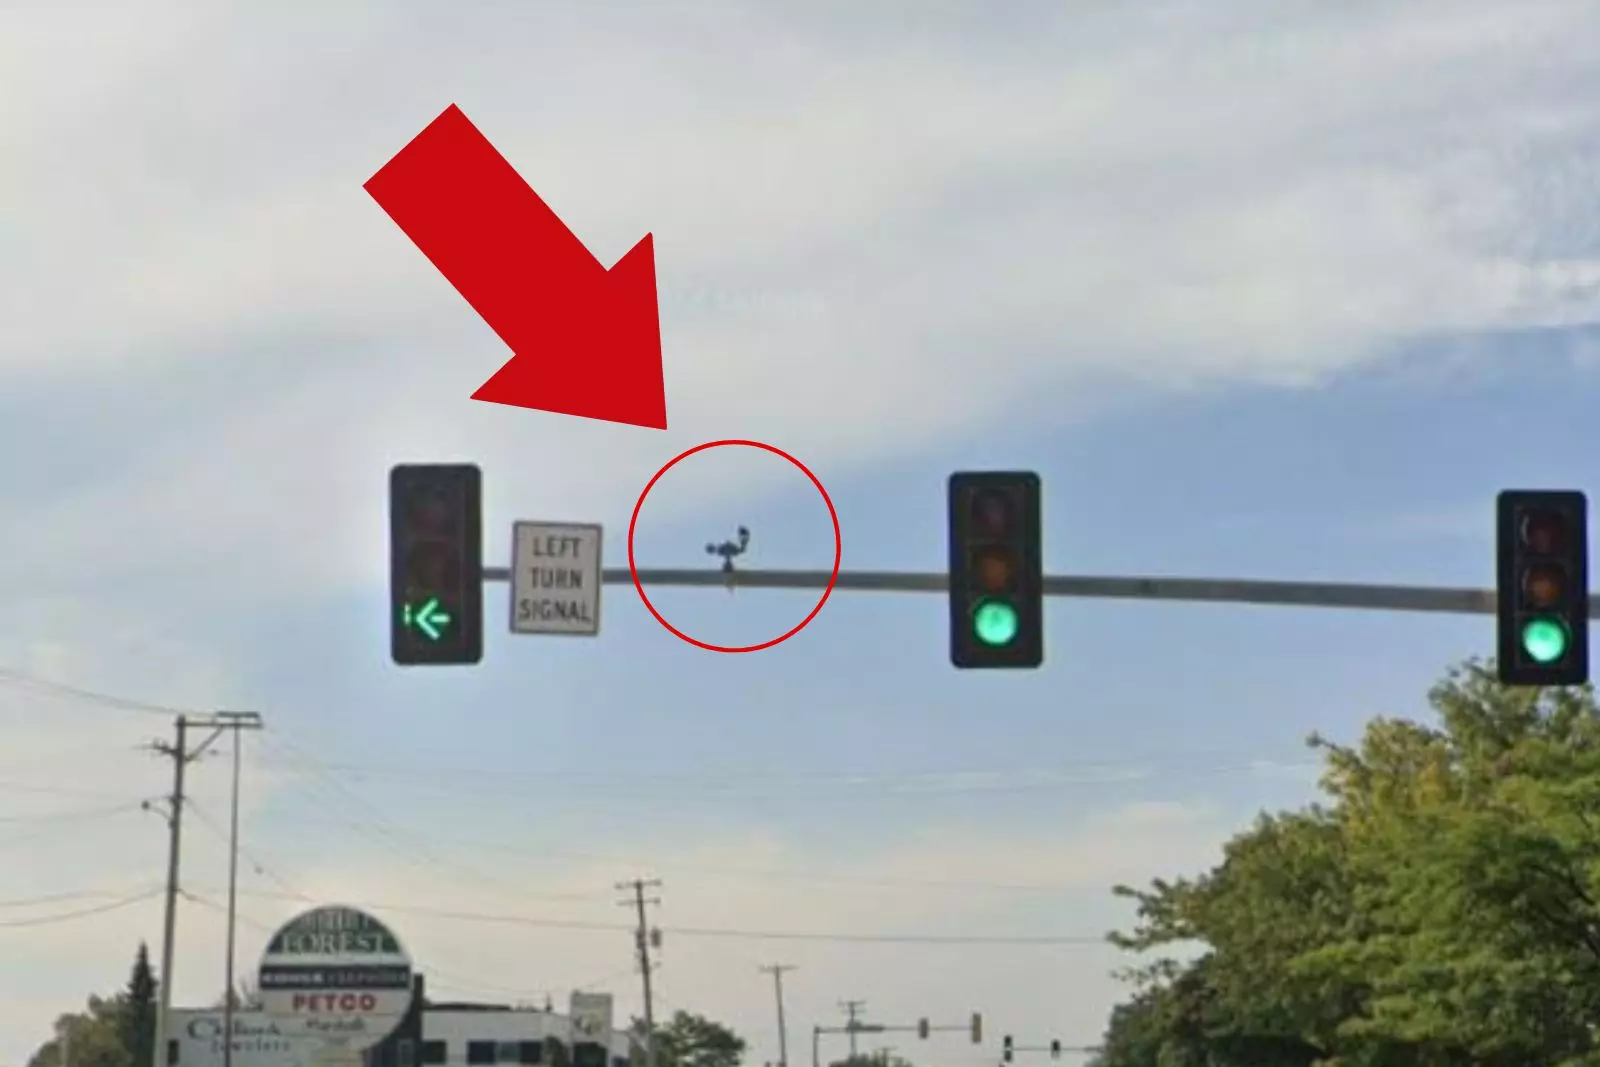 Next Stop, Innovation: How Adding a White Light to Traffic Signals Could Change Driving Forever